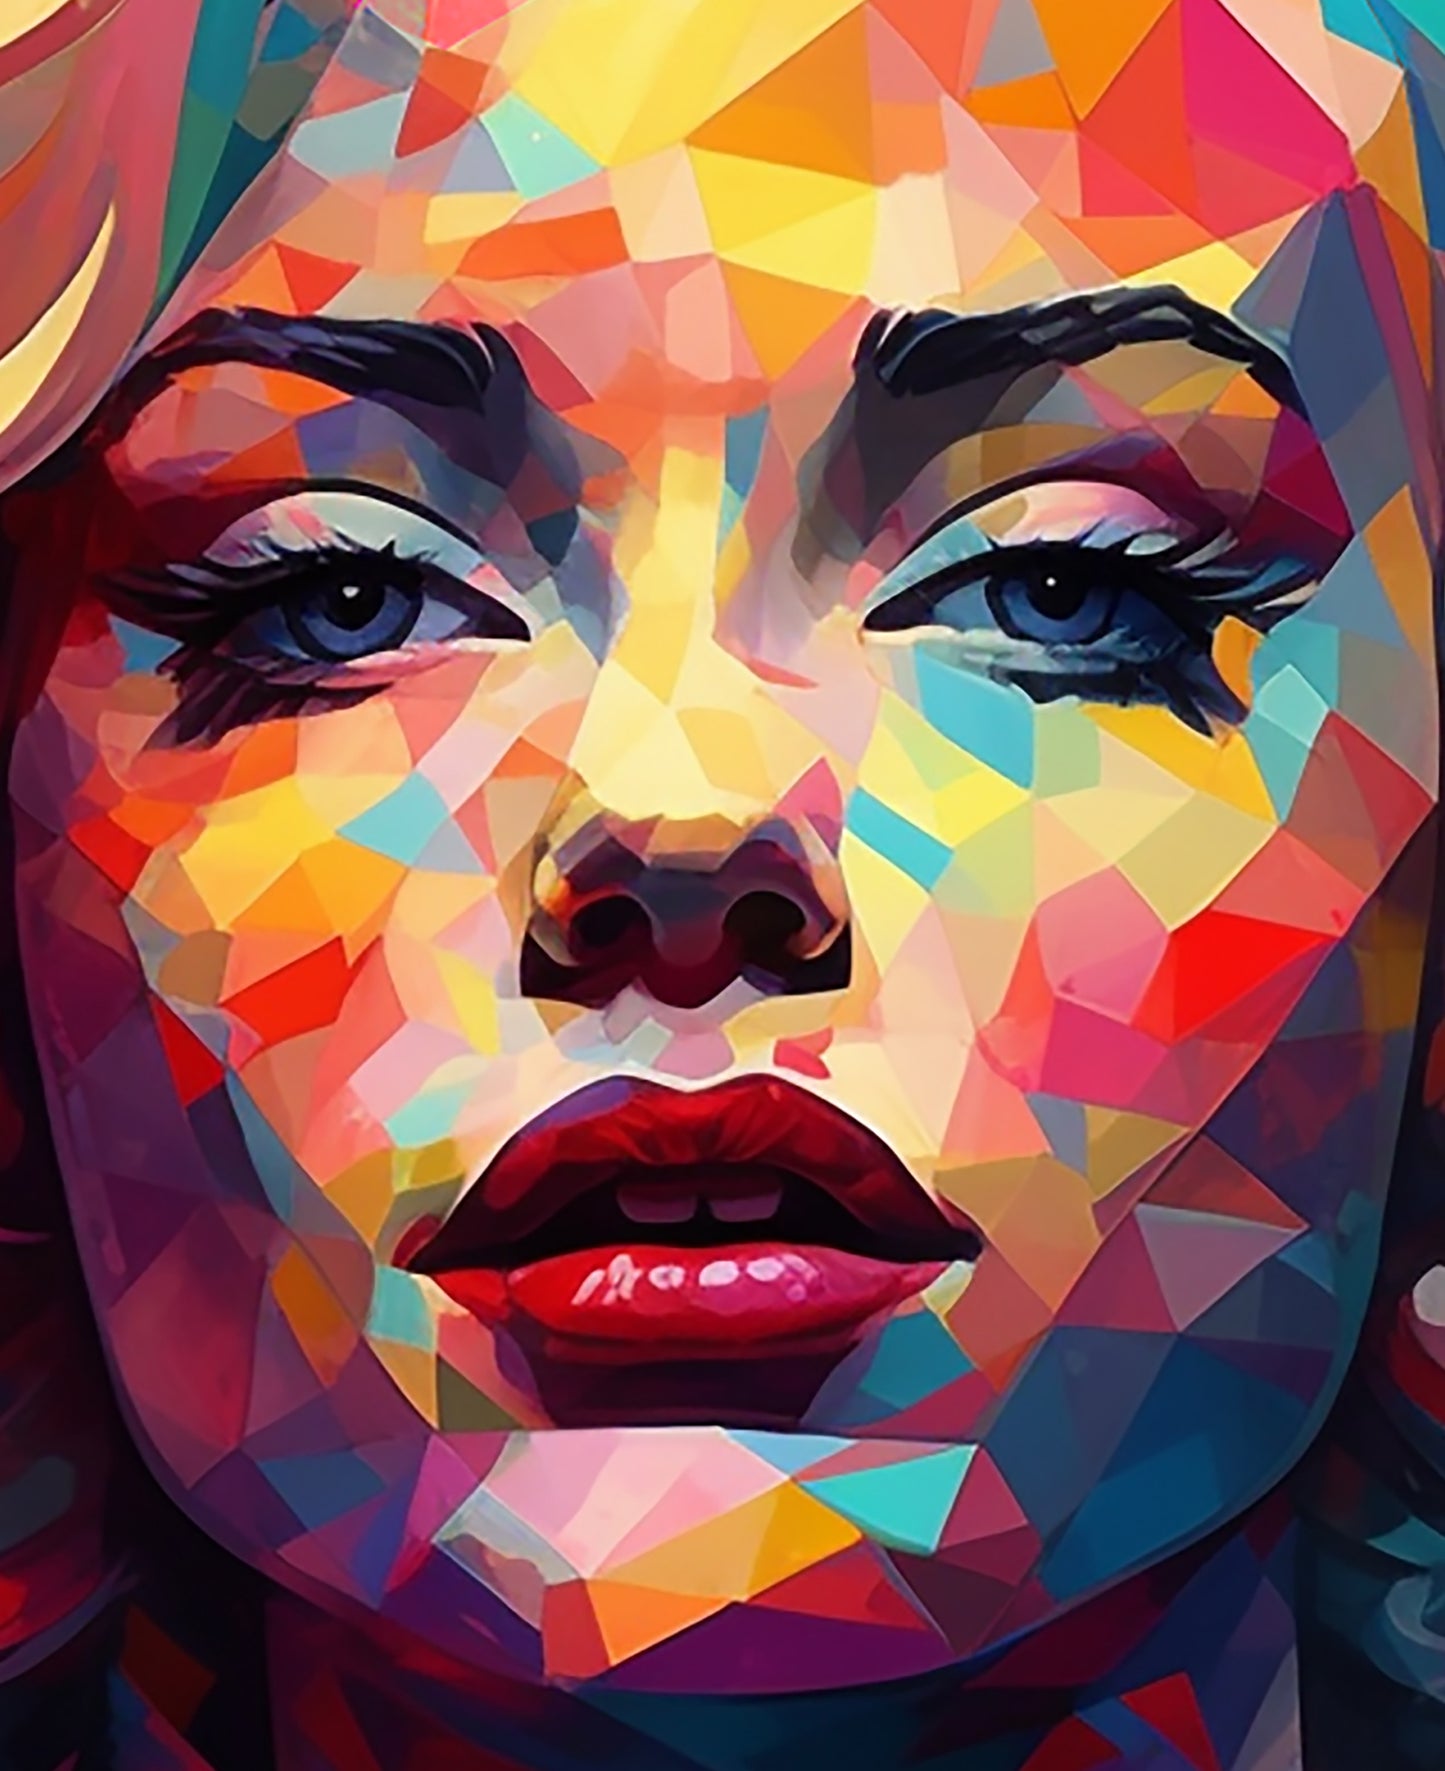 " MARILYN ARTISTIC TRIBUTE " MIX MEDIA ART WORK ON CANVAS 36 X 24 Inches